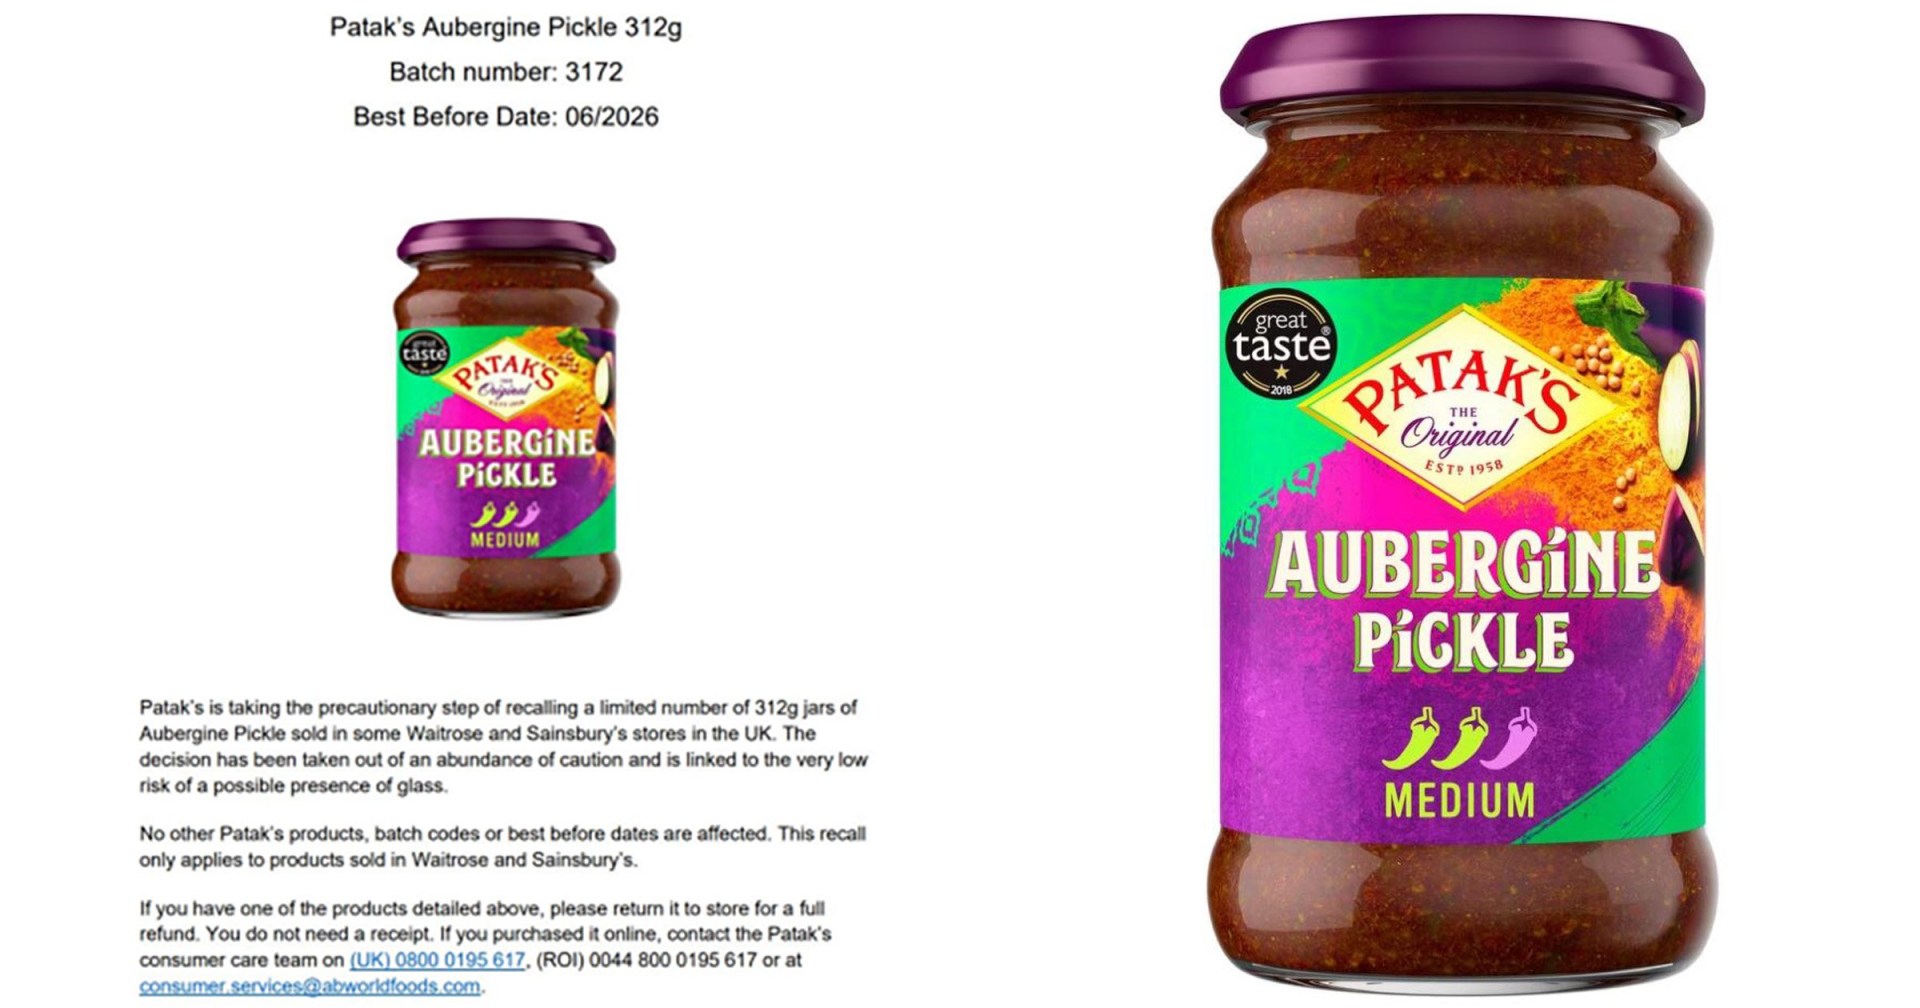 urgent recall for popular food item that may contain shards of glass